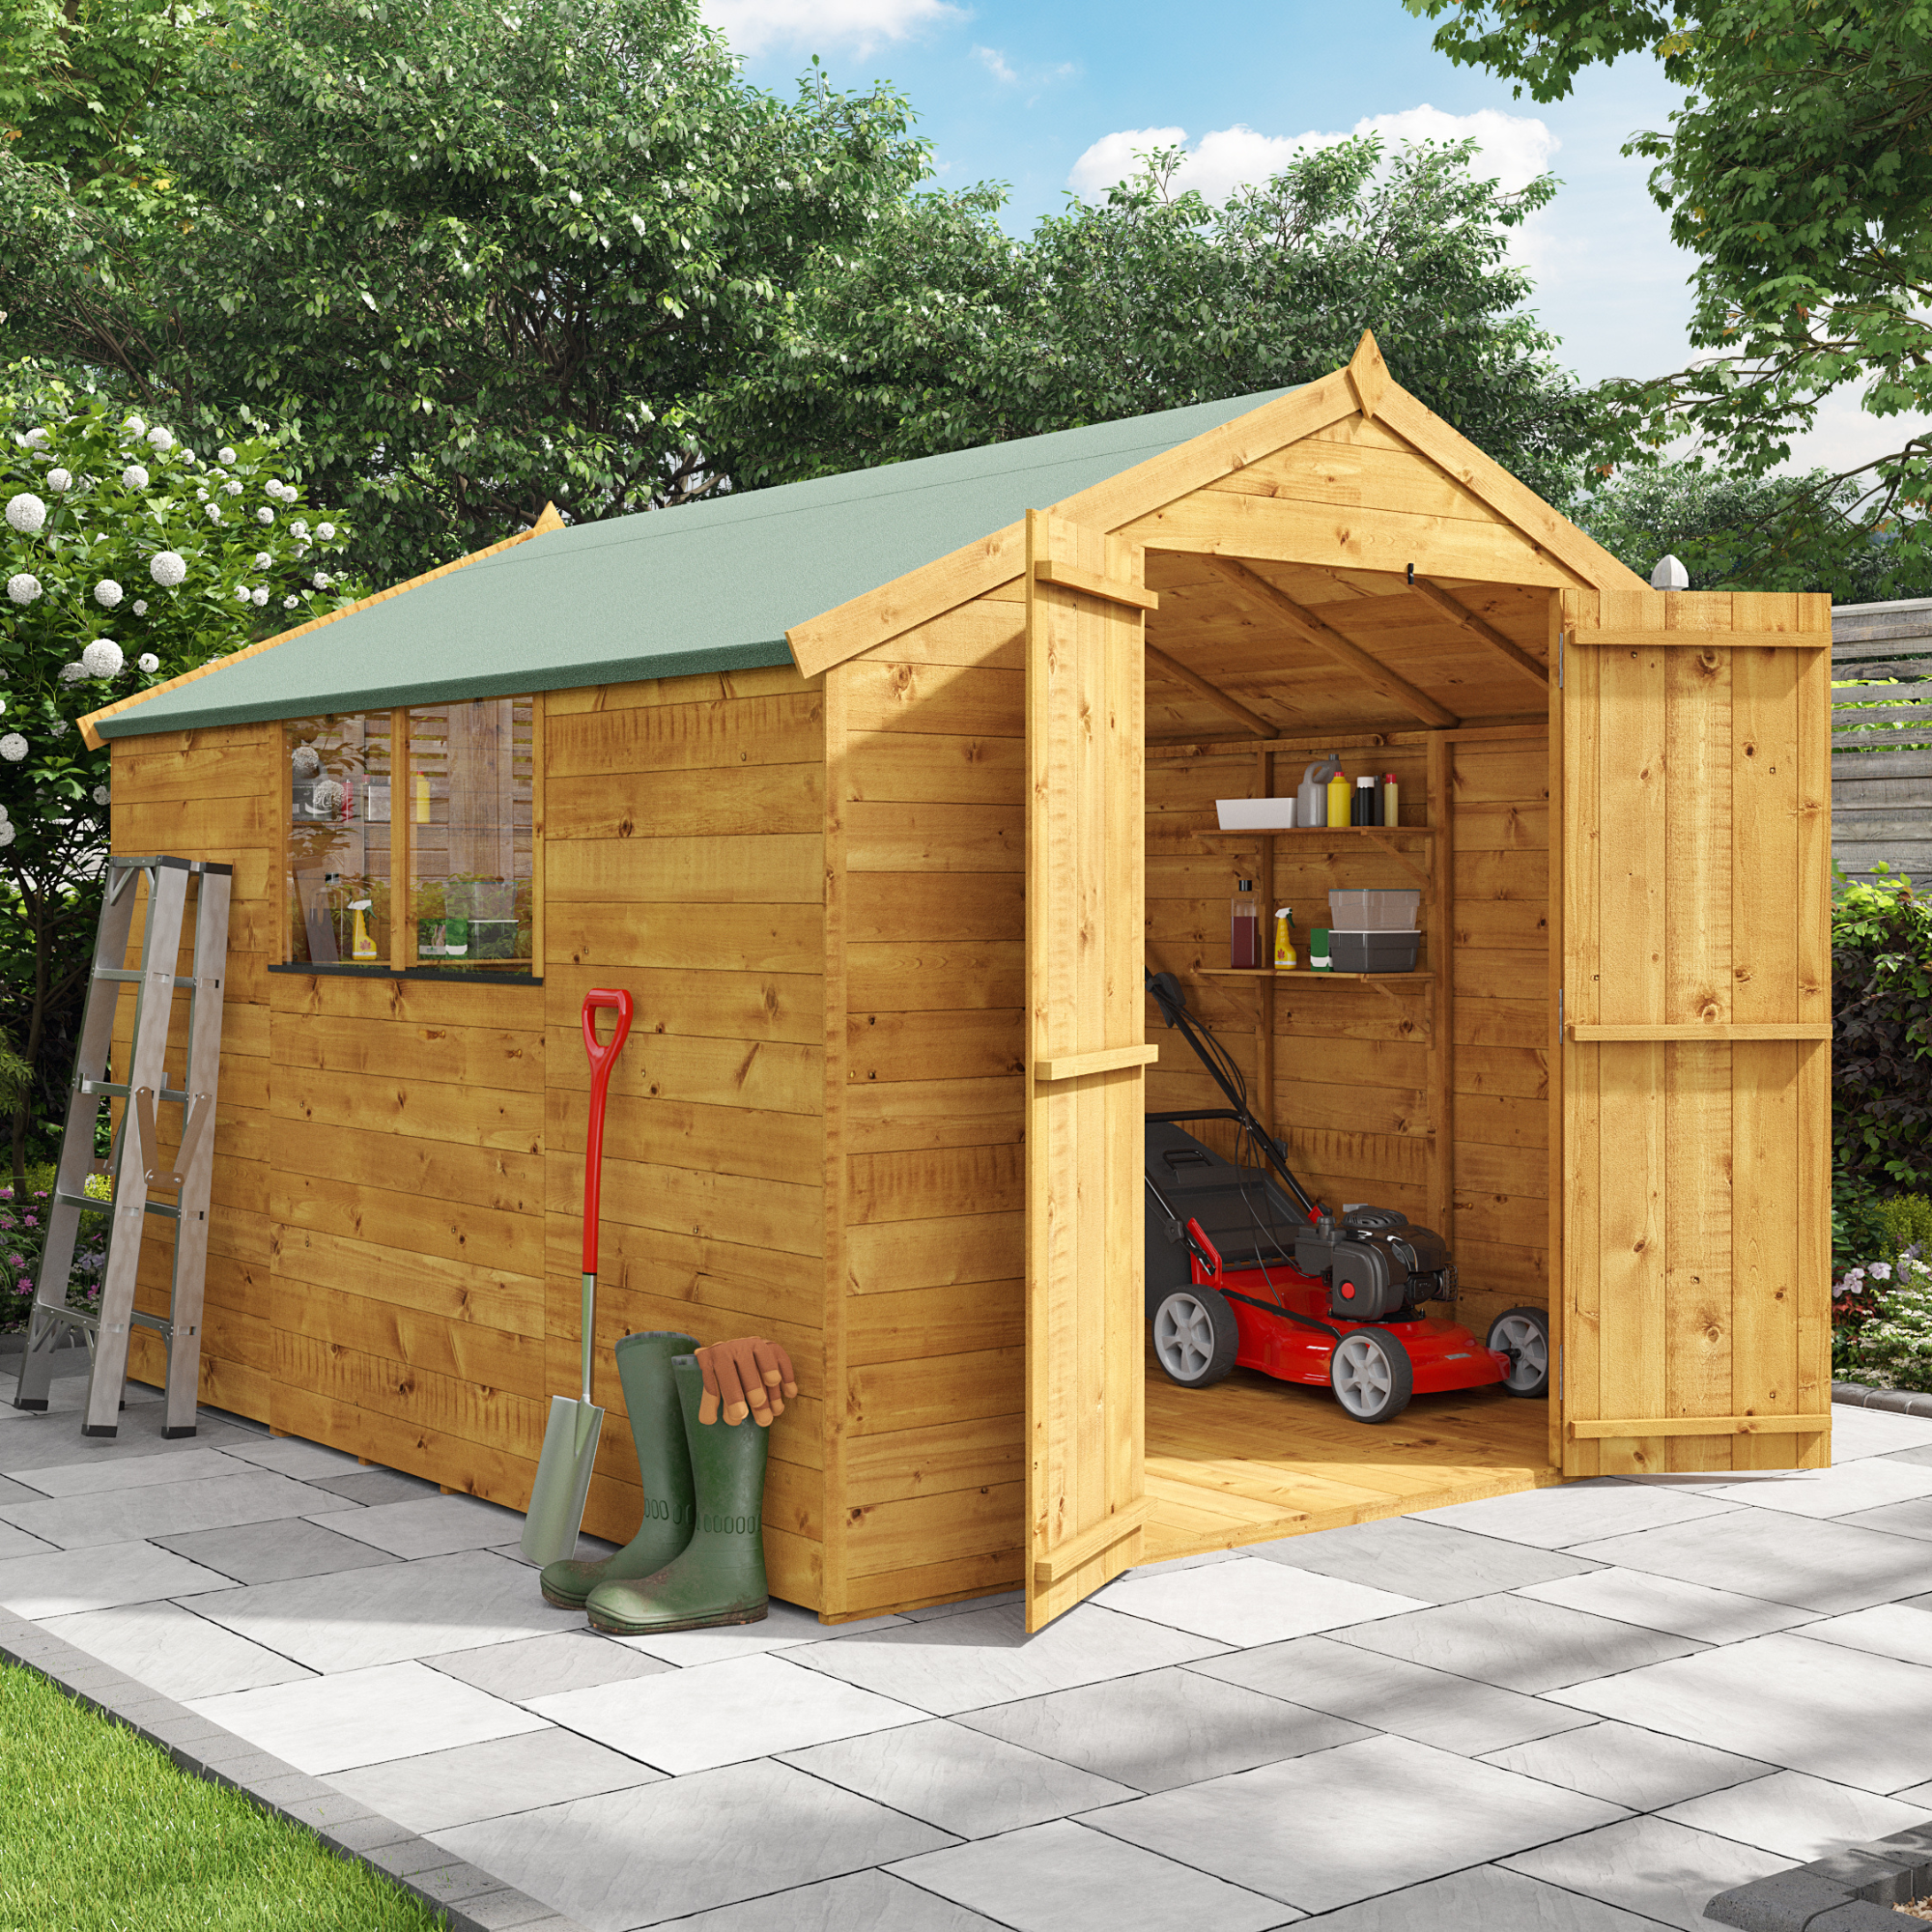 10 x 8 Shed - BillyOh Master Tongue and Groove Wooden Shed - 10x8 Garden Shed - Windowed